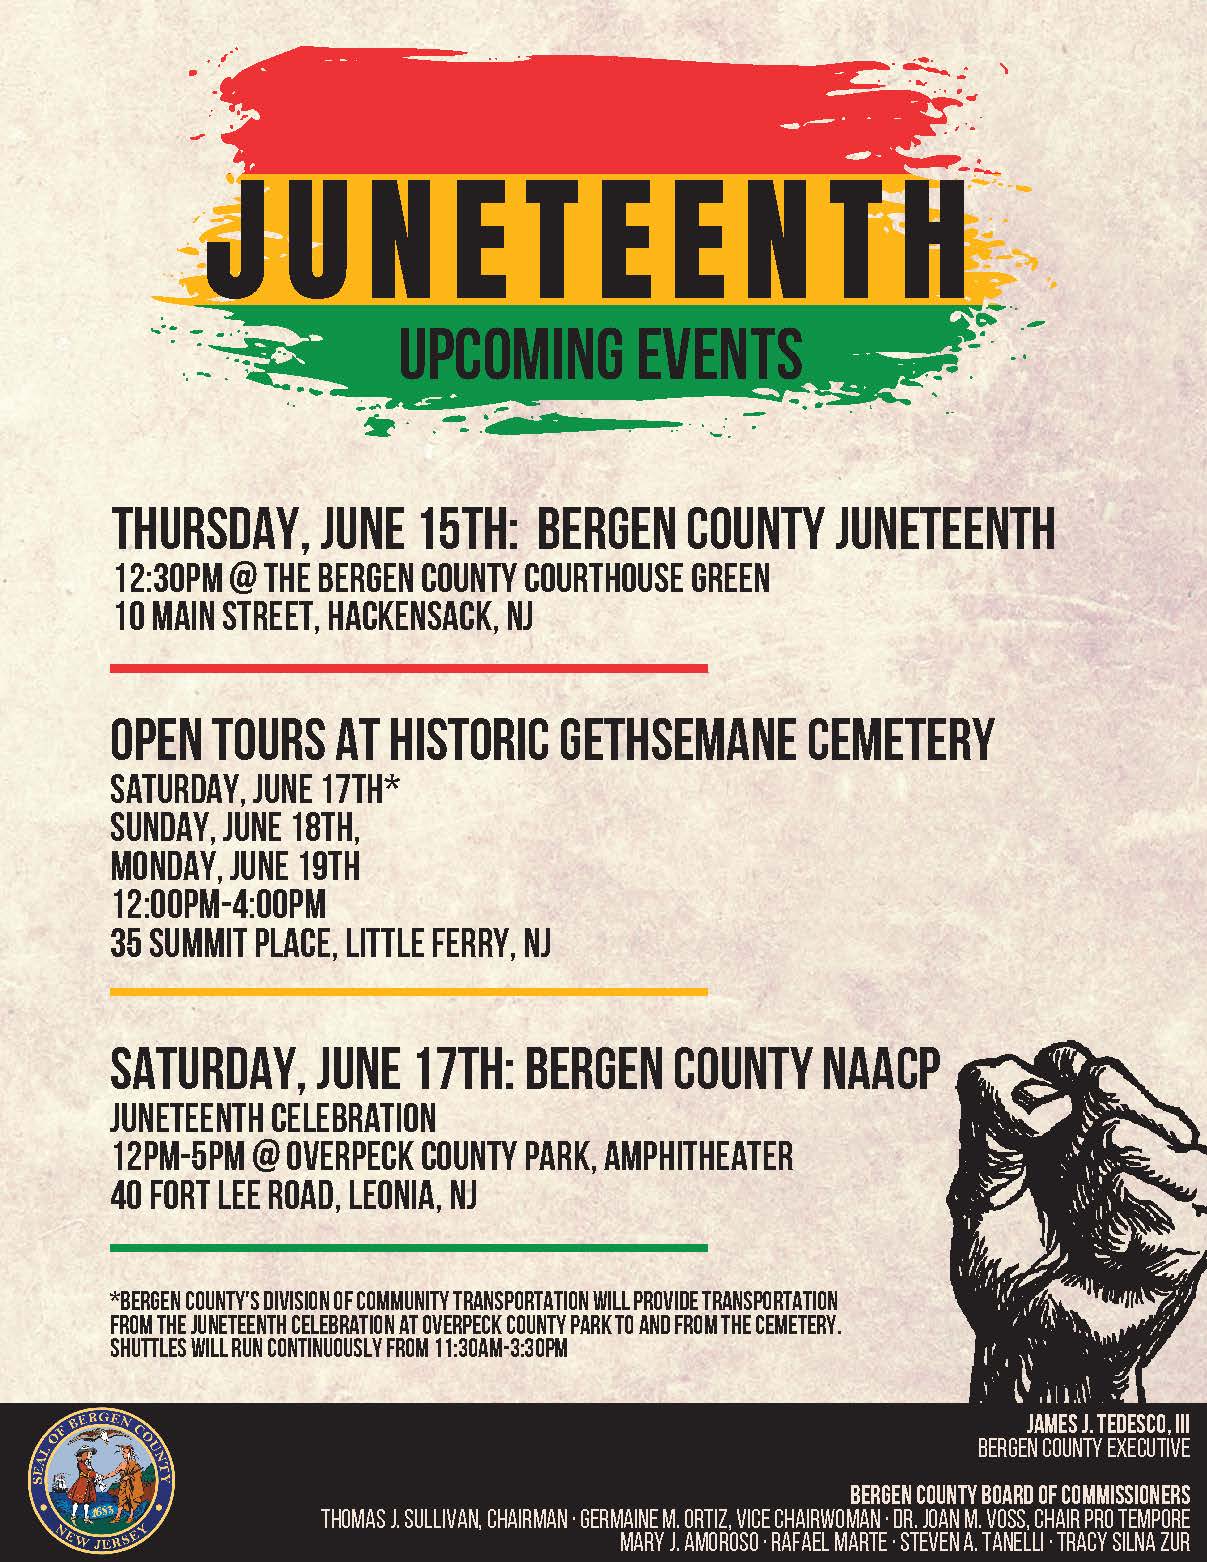 juneteenth upcoming events